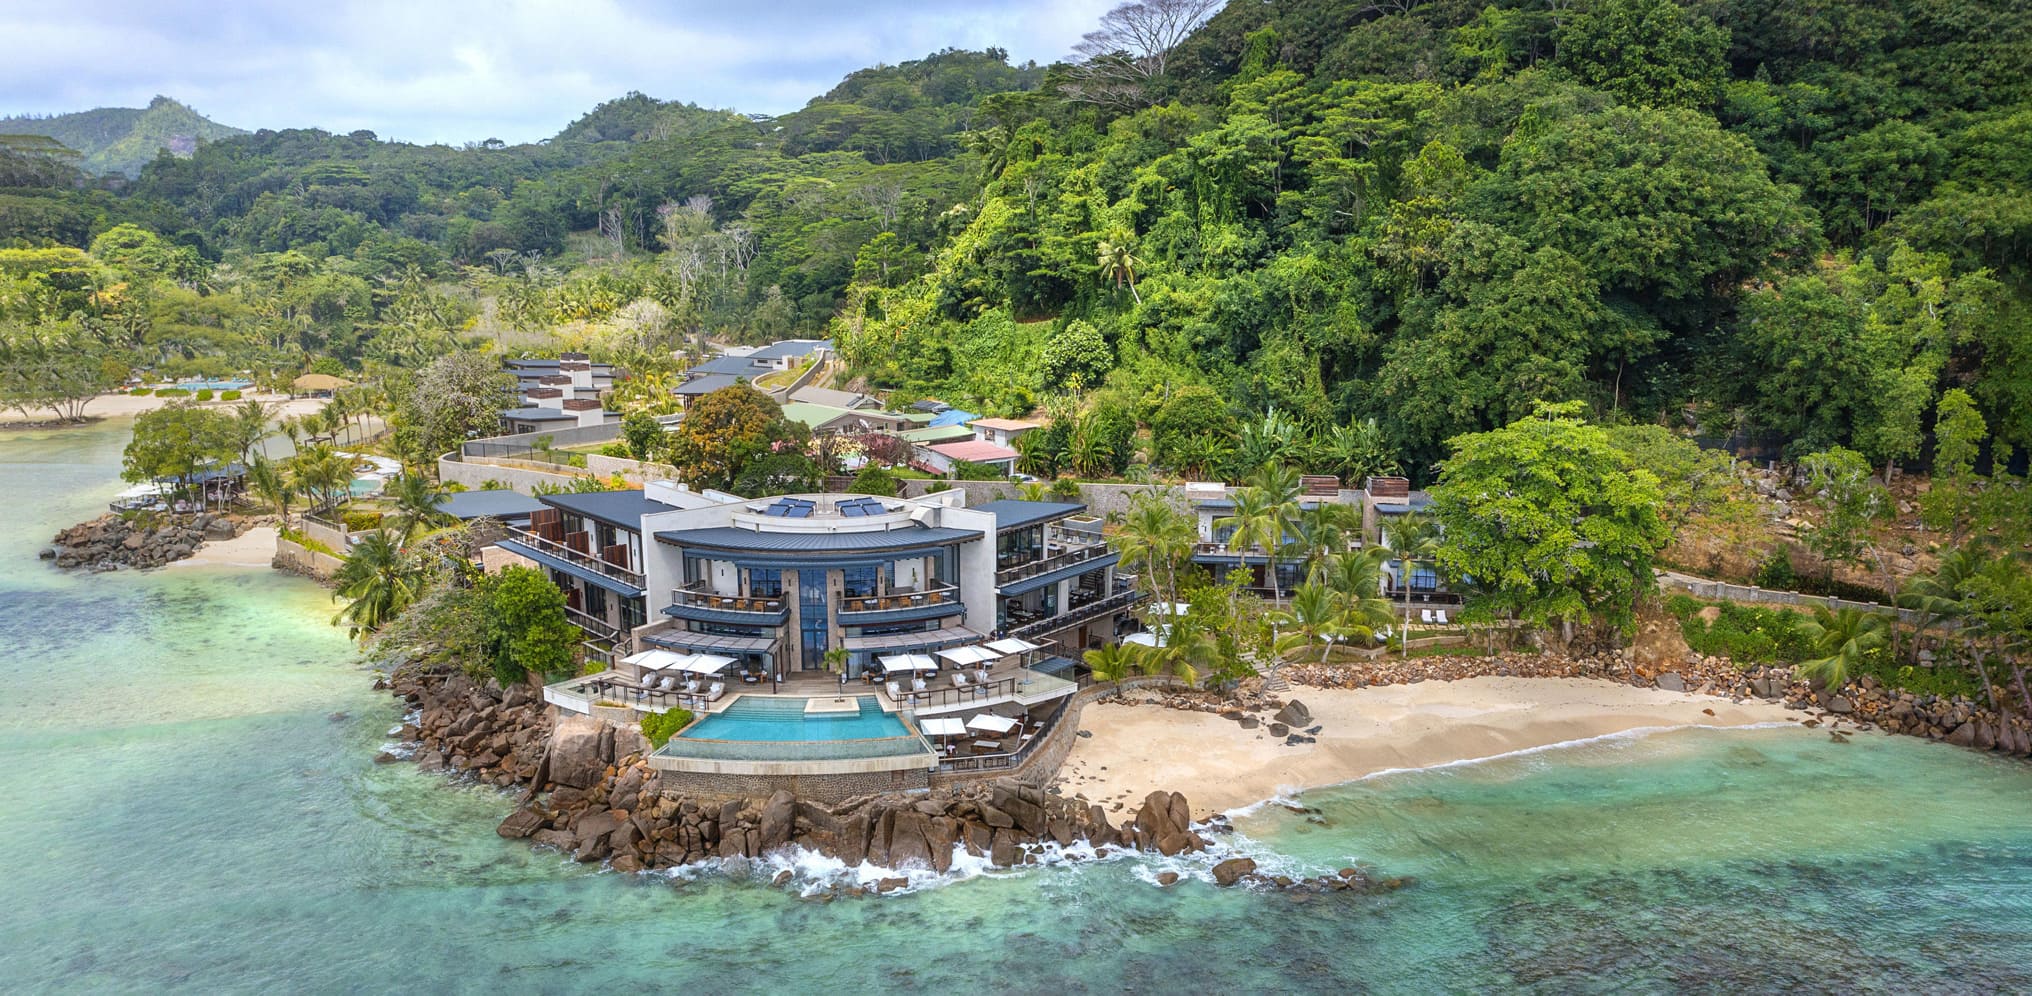 Beachfront resort nestled on a pristine Seychelles island, a top stay highlighted in our Seychelles travel guide, epitomizing luxury and natural beauty for discerning travelers.